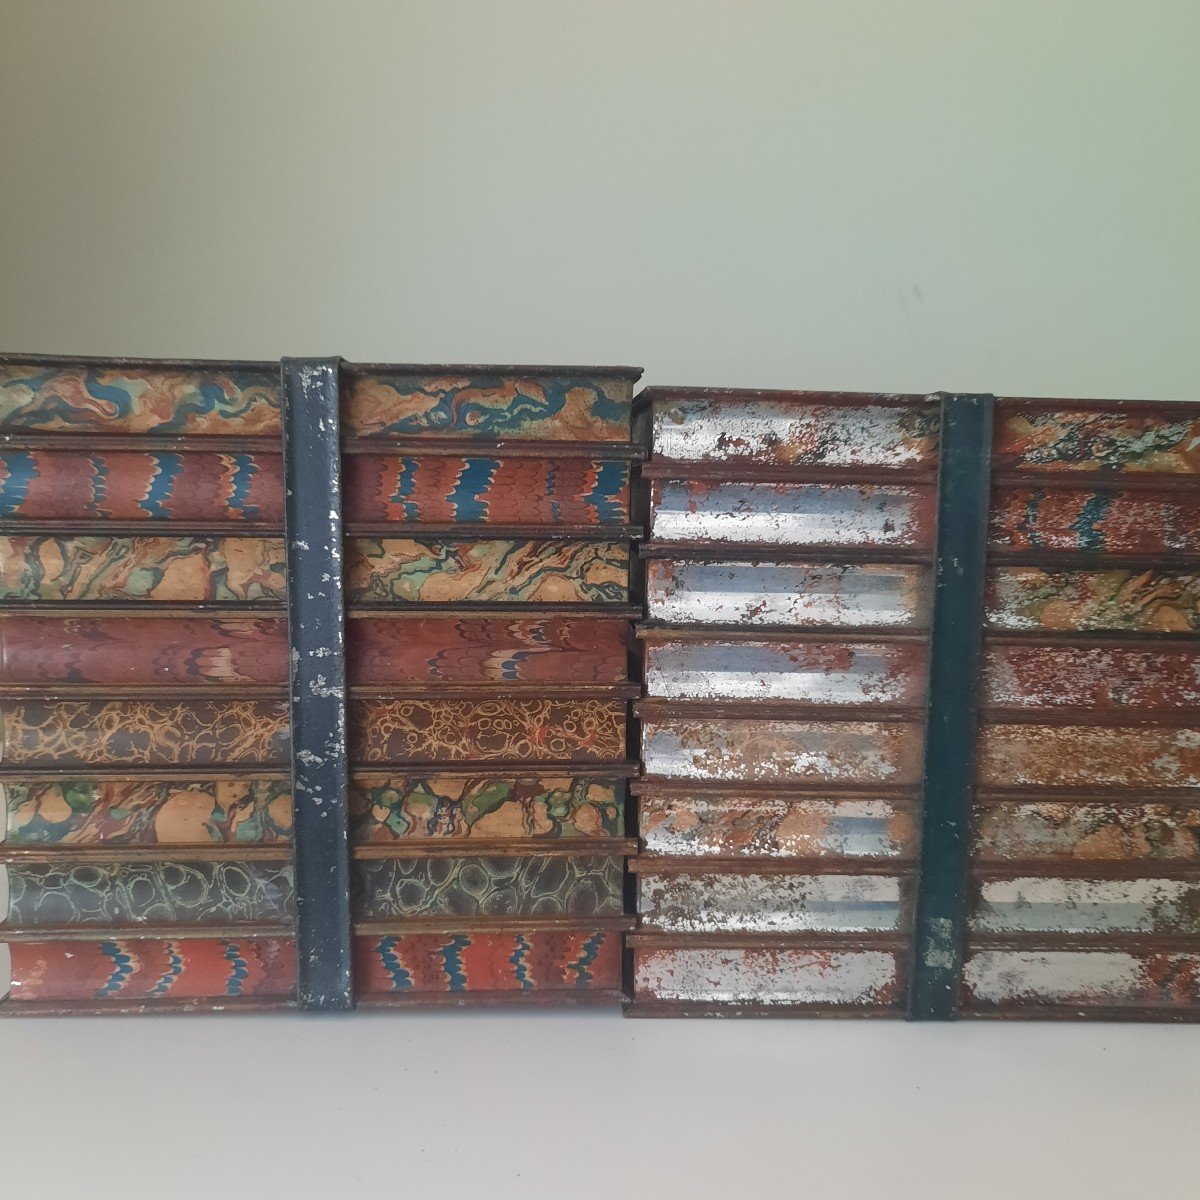 Waverley Biscuits Huntley Palmers Tin From Reading In 1903.... Book Boxes-photo-4